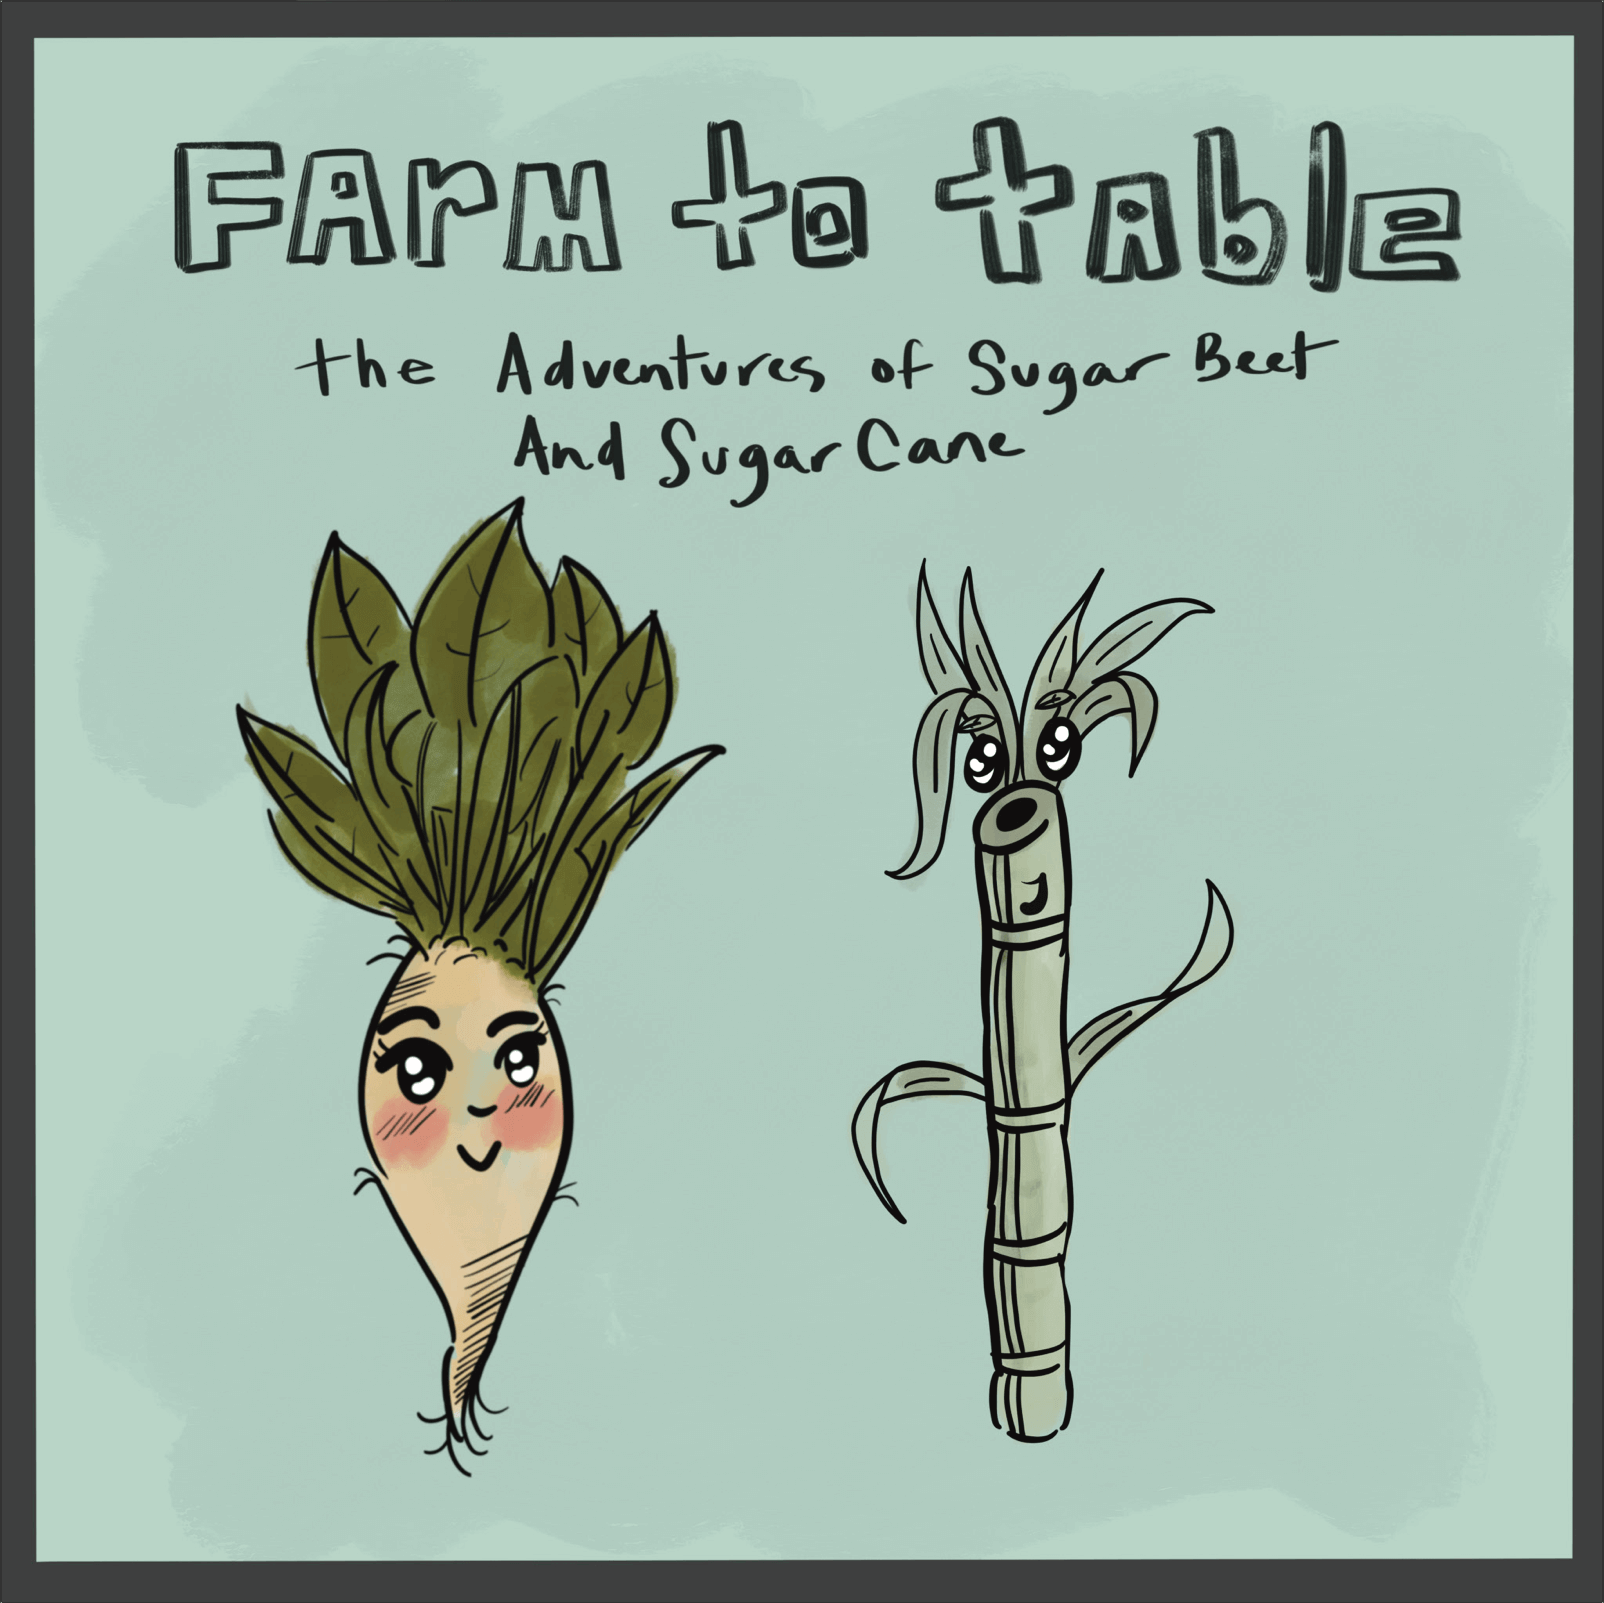 Farm to Table: The Adventures of Sugar Beet and Sugar Cane